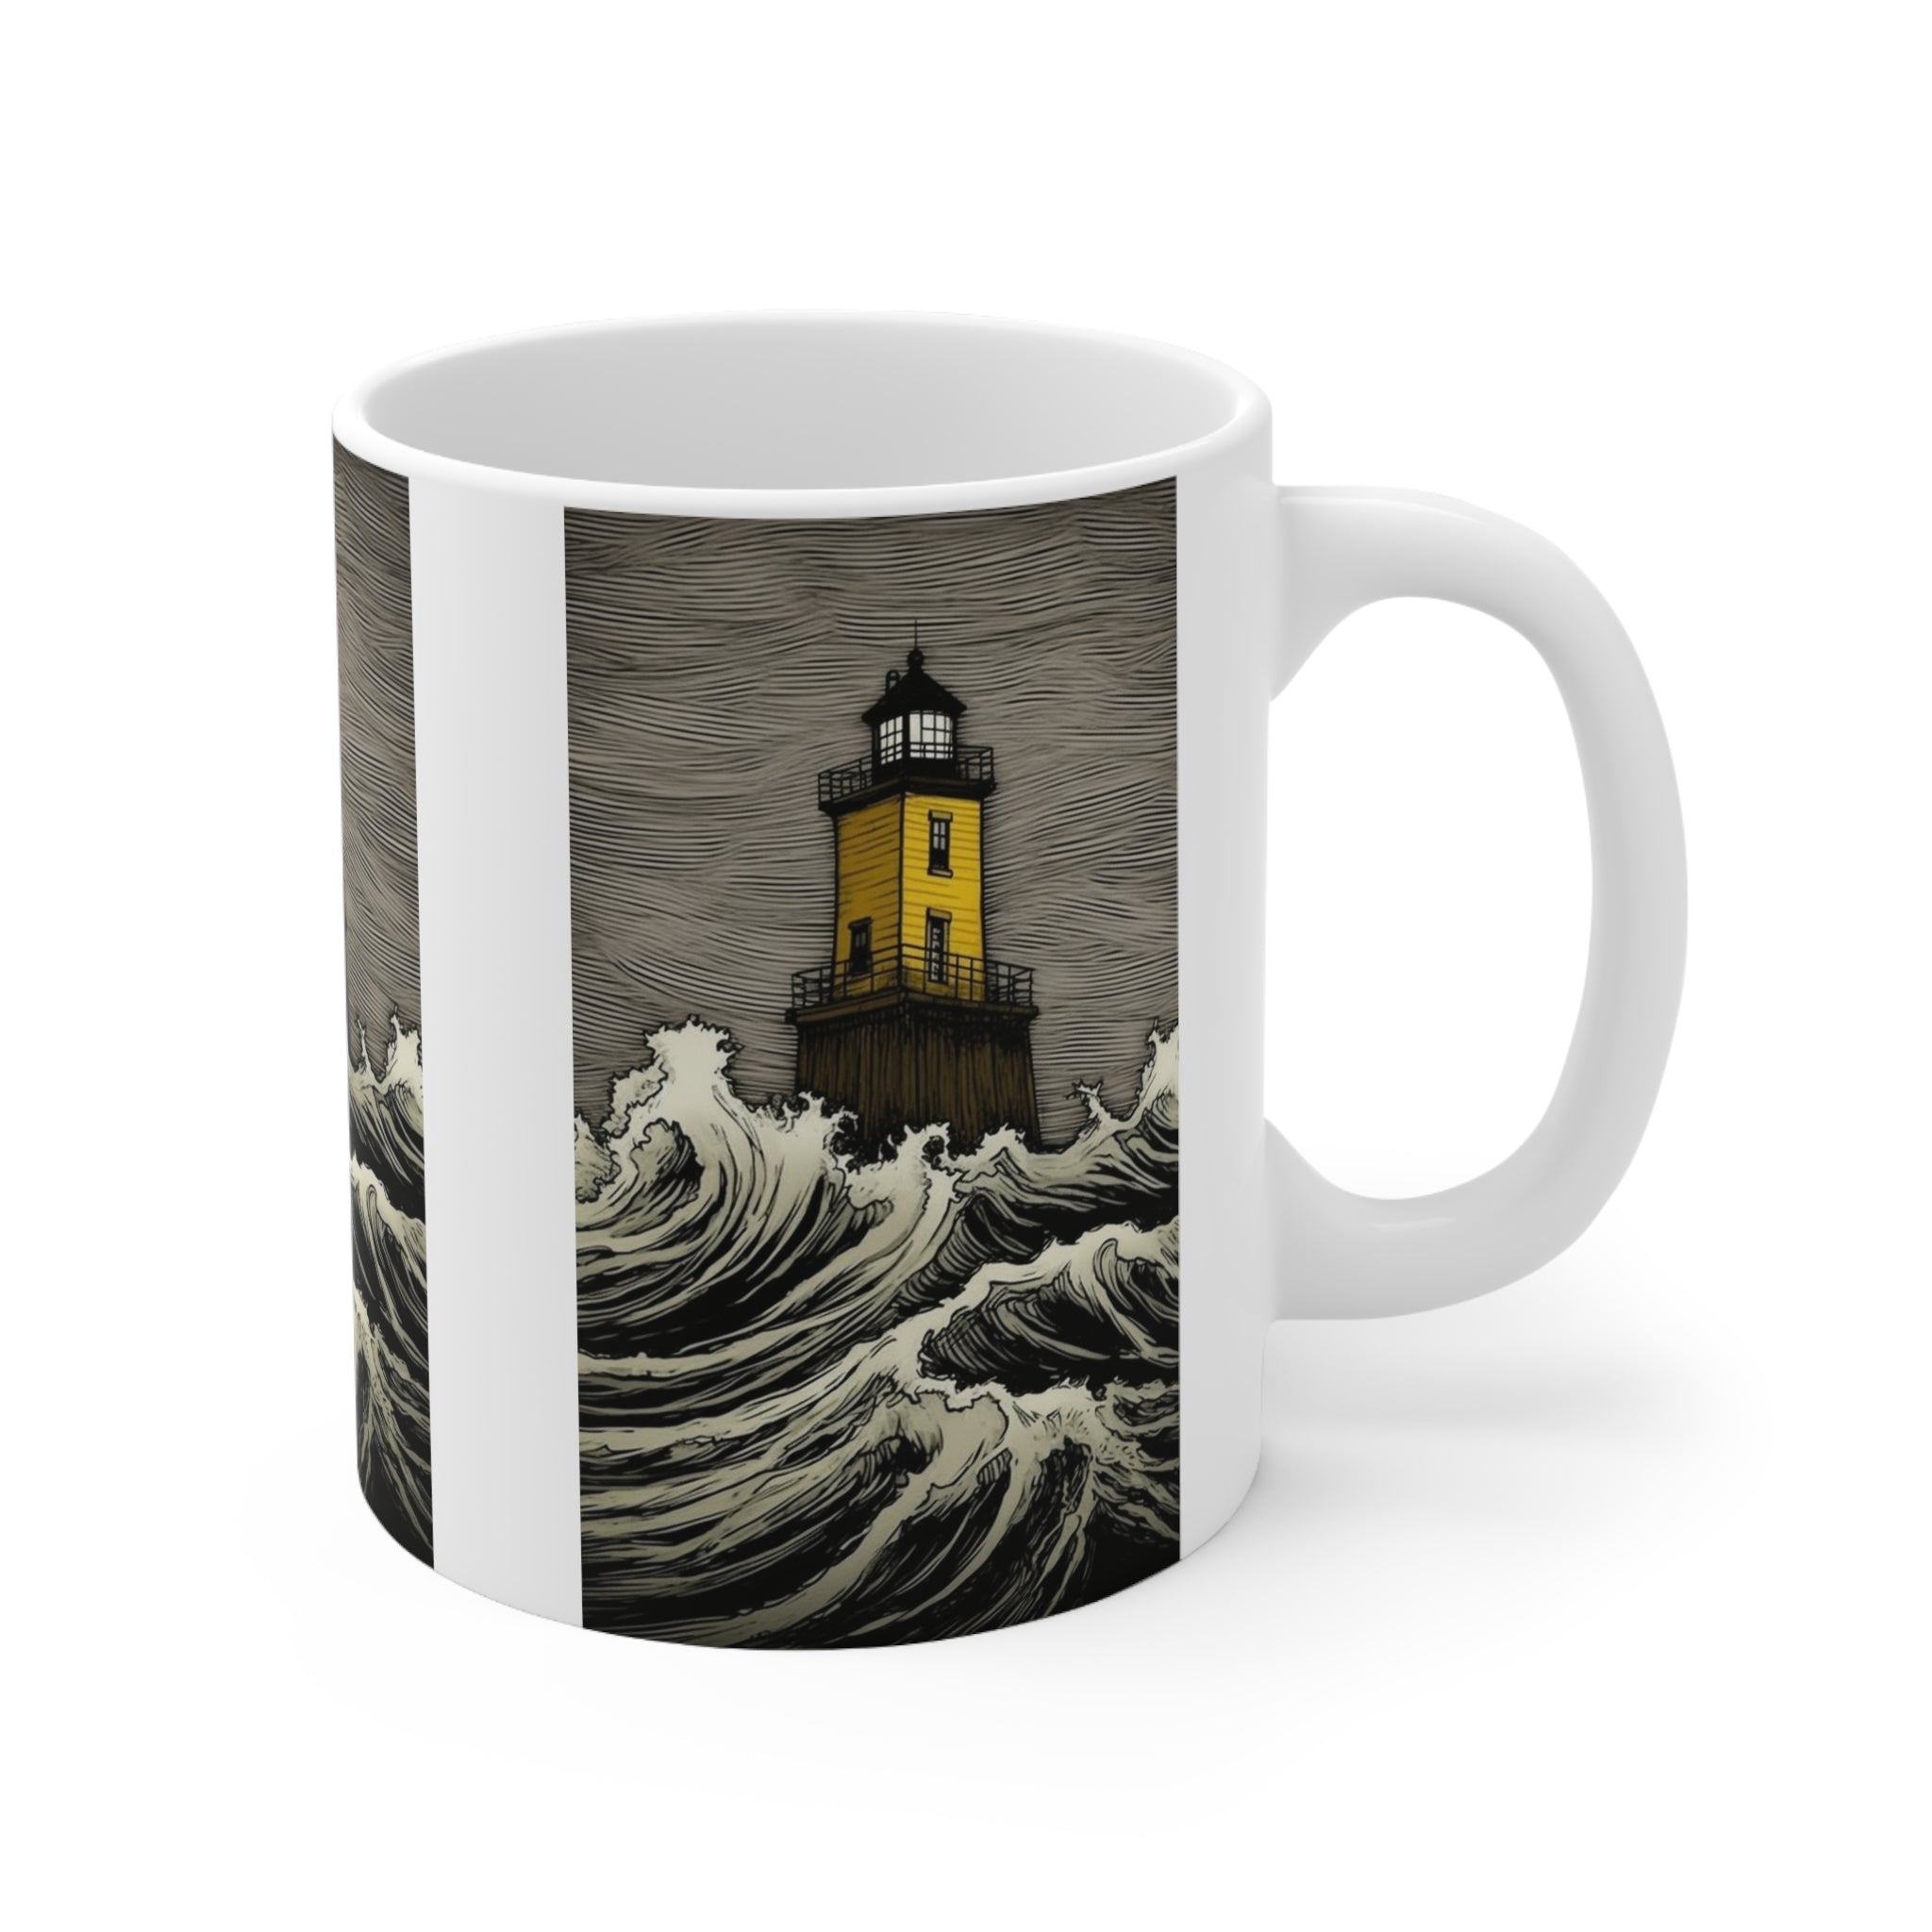 Perfect for Relaxing and Sipping Tea or Coffee "Yellow Sunflower Lighthouse Against the White Surf of the Bay" Ceramic Mug 11oz - Coastal Art and Relaxation & Nautical Painting for Coffee Lovers Gift for Teachers Gift for Employees or Boss